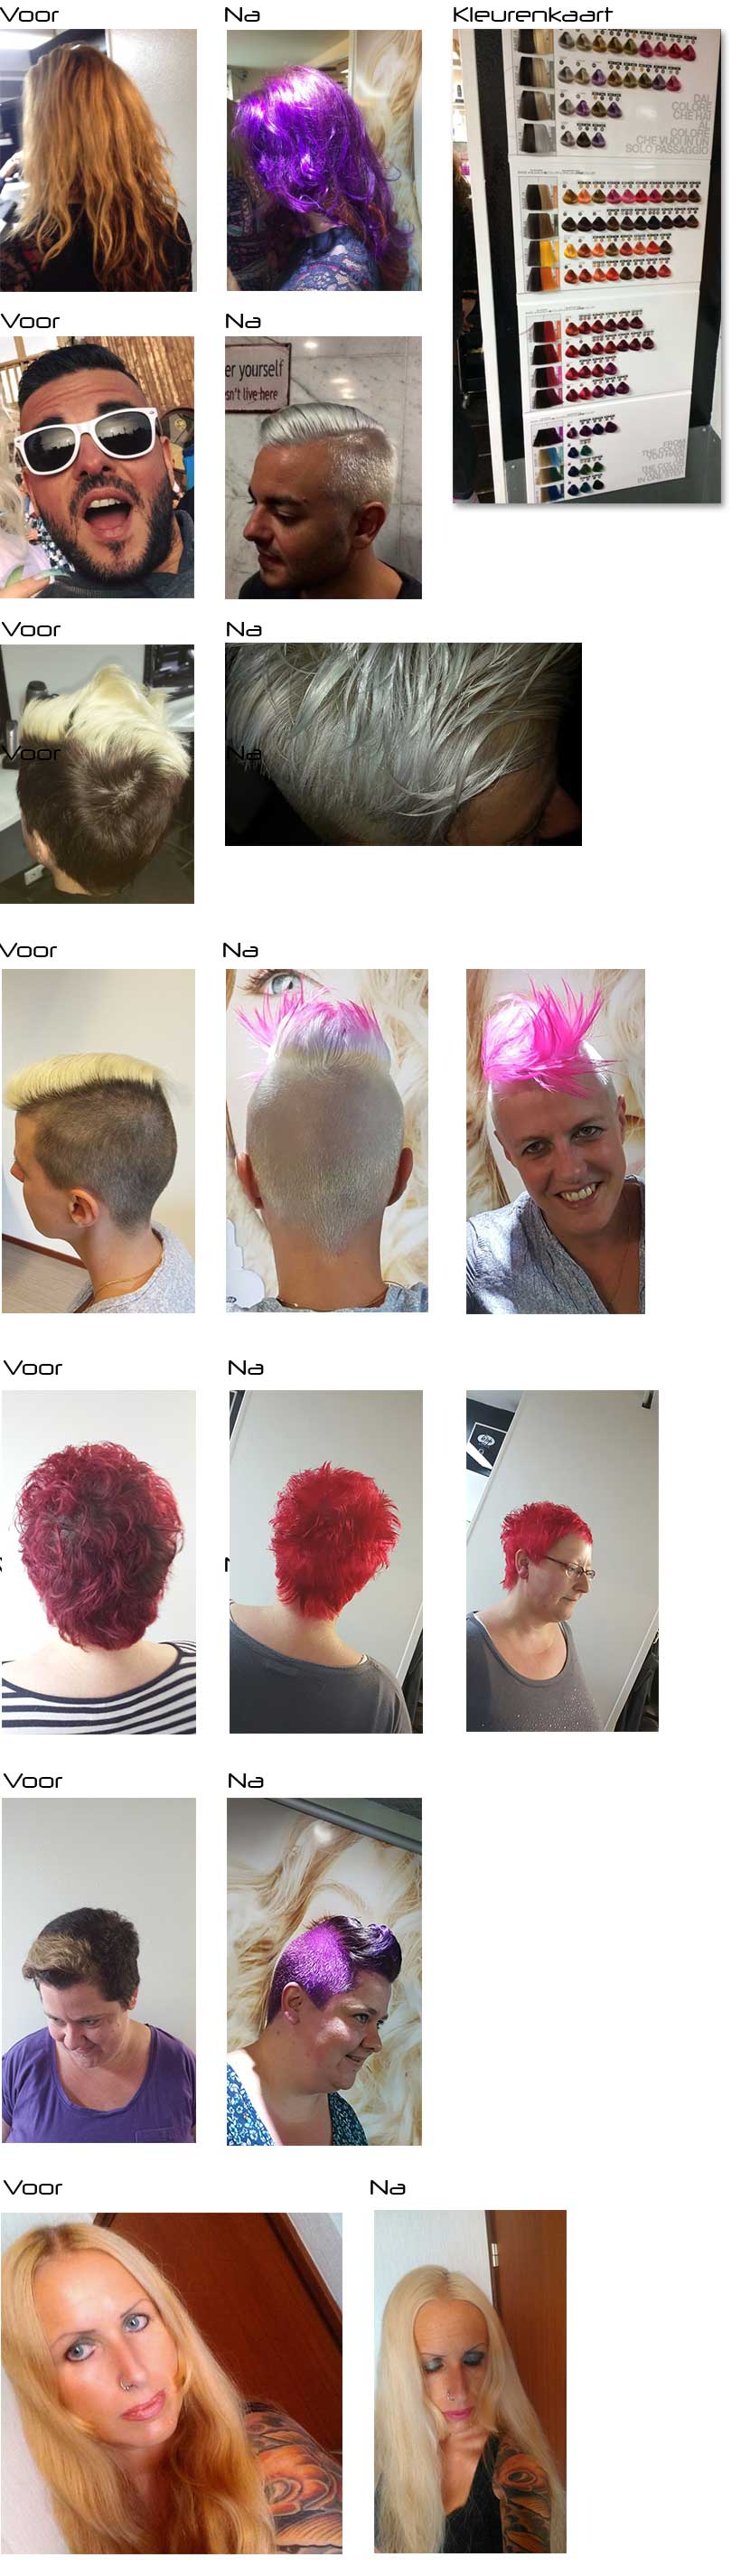 bleach and color voor na